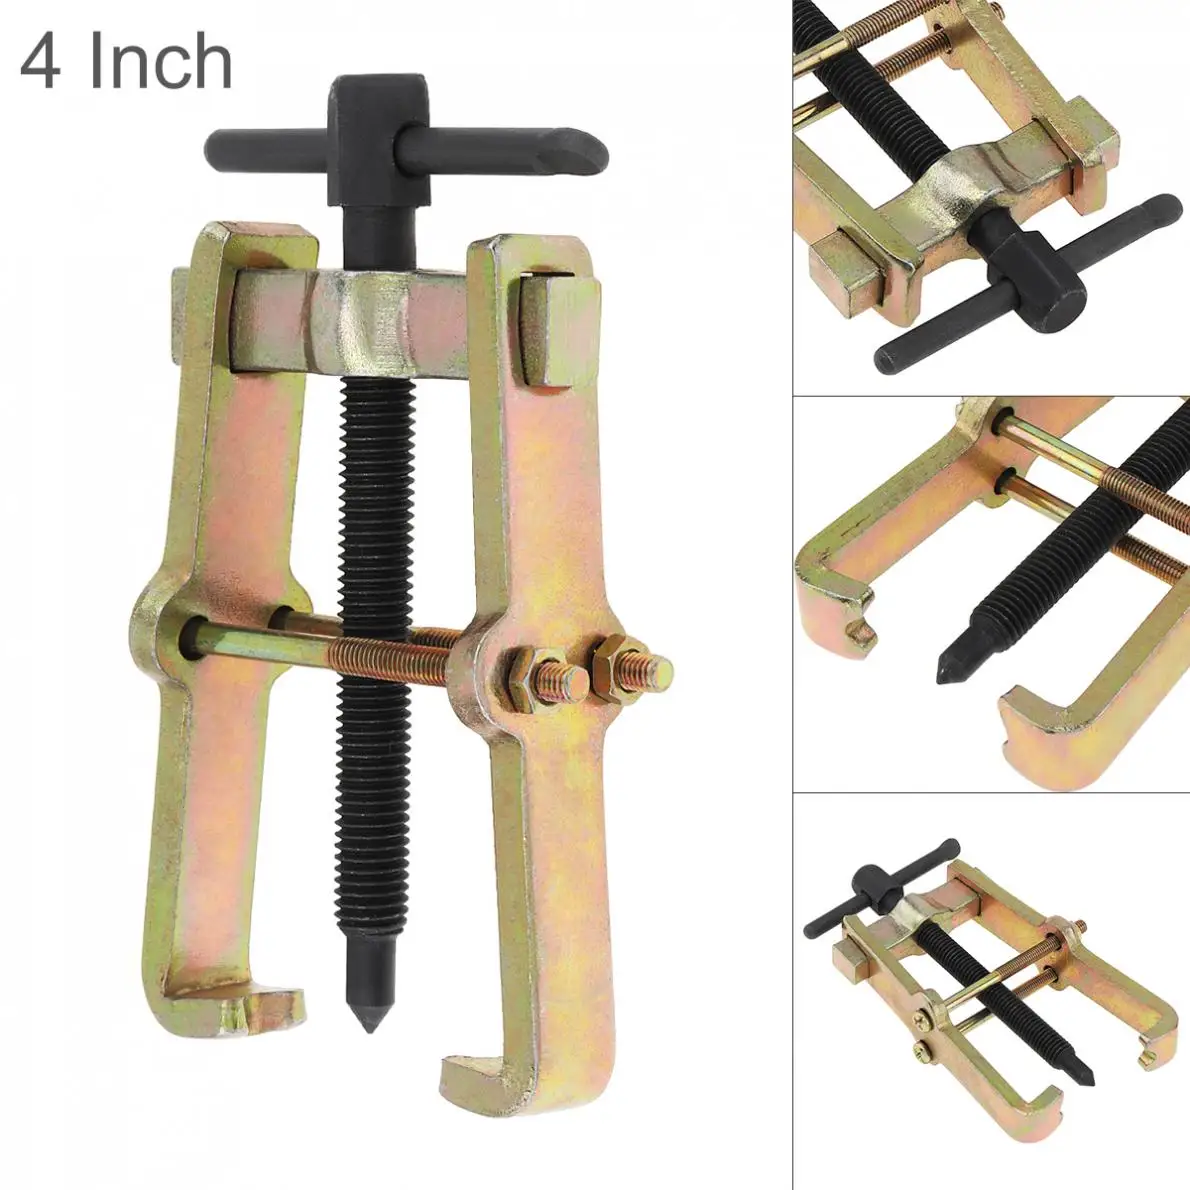 

New 4 Inch Two-claw Puller Separate Lifting Device Multi-purpose Pull Strengthen Bearing Rama for Auto Mechanic Hand Tools